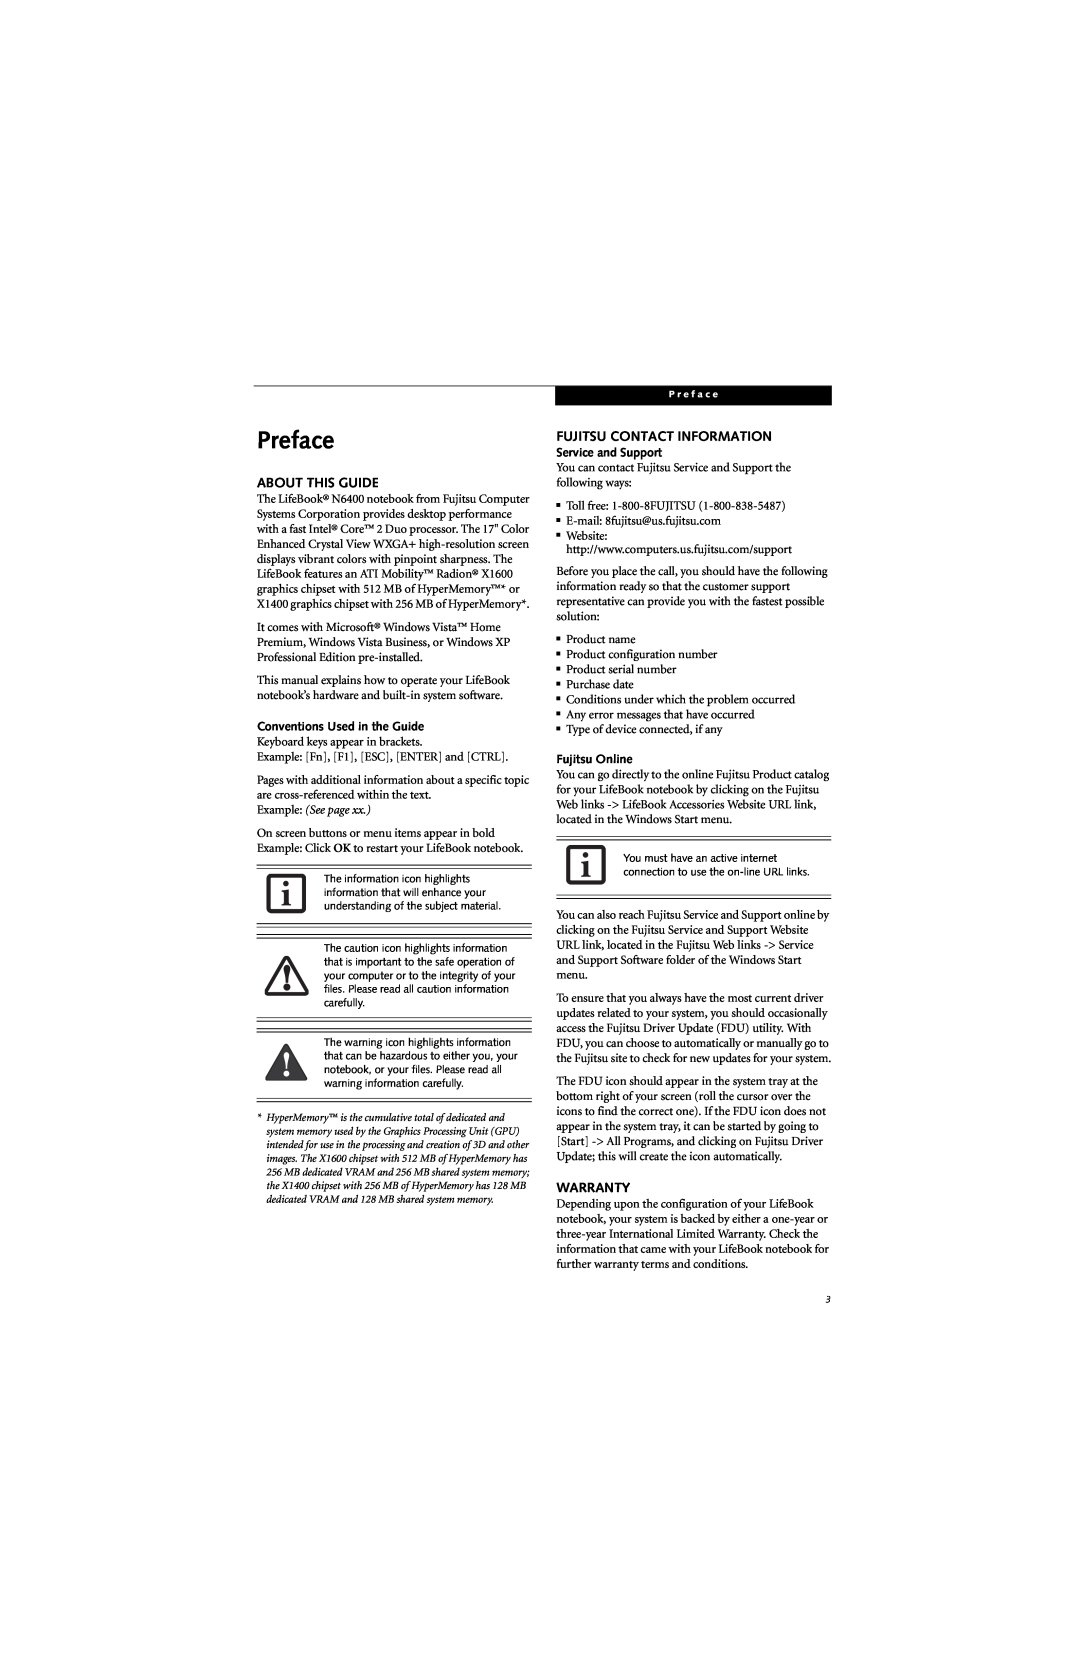 Fujitsu N6420 manual Preface, About This Guide, Fujitsu Contact Information, Warranty, Conventions Used in the Guide 